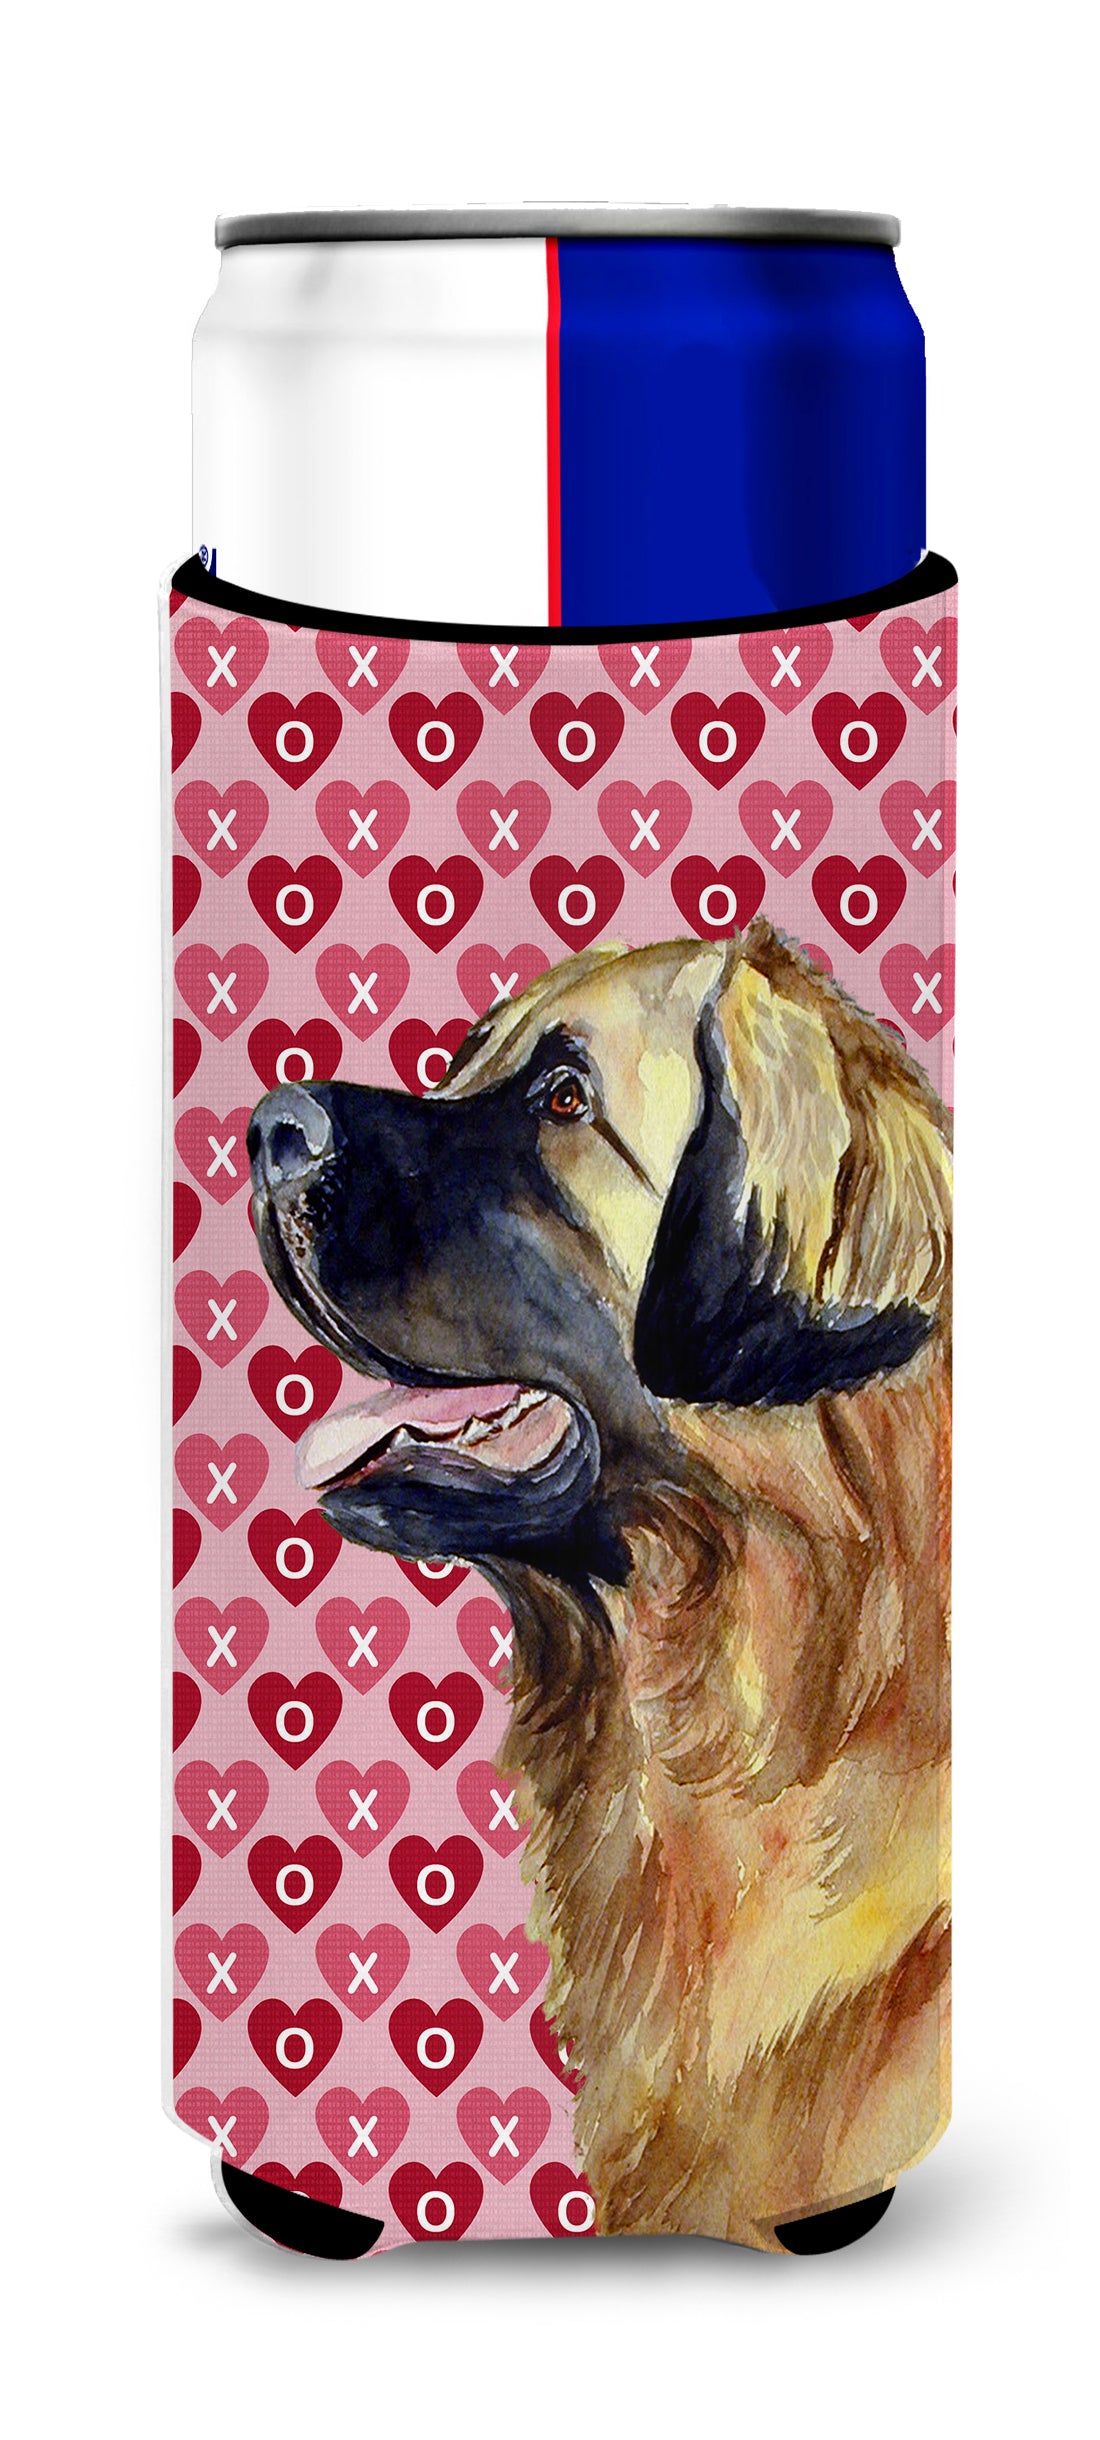 Leonberger Hearts Love and Valentine's Day Portrait Ultra Beverage Insulators for slim cans LH9168MUK.